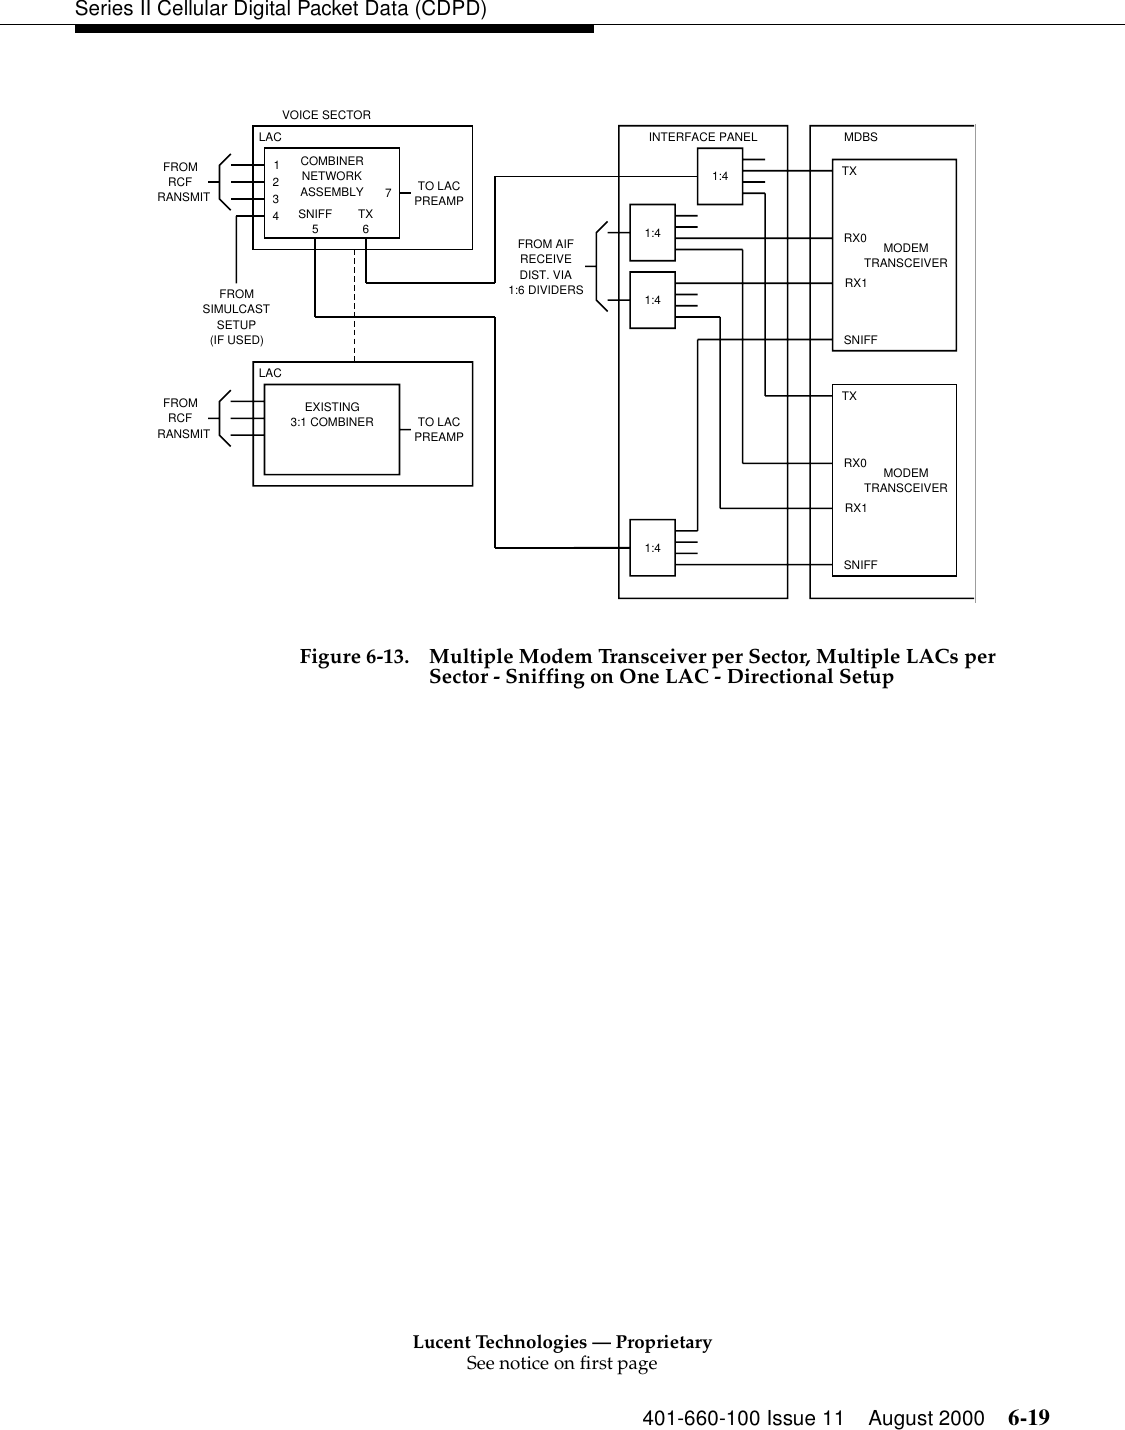 Lucent Technologies — ProprietarySee notice on first page401-660-100 Issue 11 August 2000 6-19Series II Cellular Digital Packet Data (CDPD)Figure 6-13. Multiple Modem Transceiver per Sector, Multiple LACs per Sector - Sniffing on One LAC - Directional SetupVOICE SECTORLAC12347INTERFACE PANEL MDBSTXRX0RX1SNIFFFROMRCFRANSMITCOMBINERNETWORKASSEMBLYSNIFF5TX6LACFROMRCFRANSMITTO LACPREAMPTO LACPREAMPFROM AIFRECEIVEDIST. VIA1:6 DIVIDERSMODEMTRANSCEIVERTXRX0RX1SNIFFMODEMTRANSCEIVER1:41:41:41:4FROMSIMULCASTSETUP(IF USED)EXISTING3:1 COMBINER